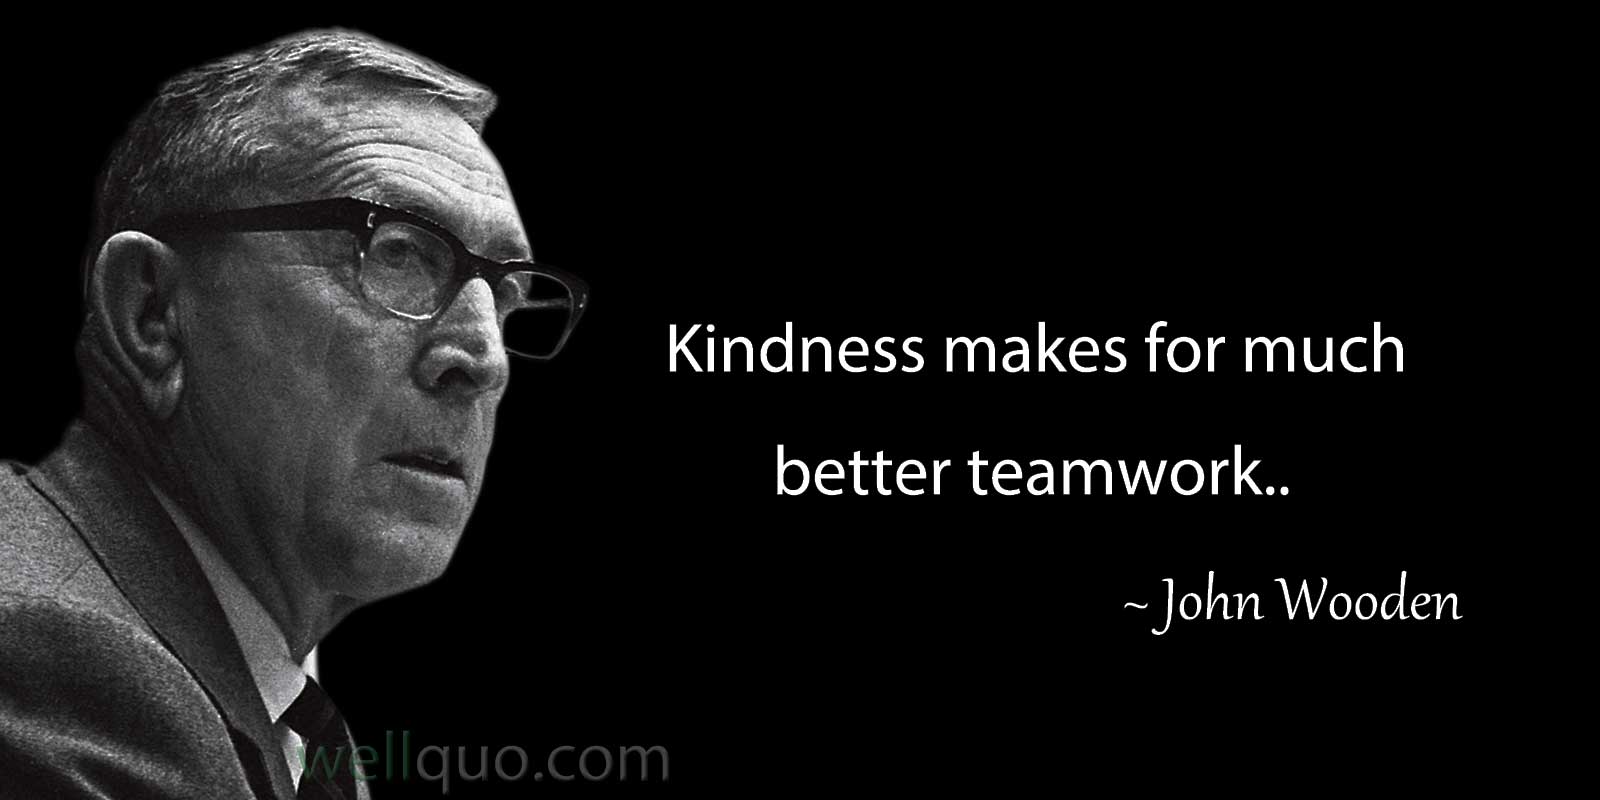 John Wooden Quotes - Well Quo